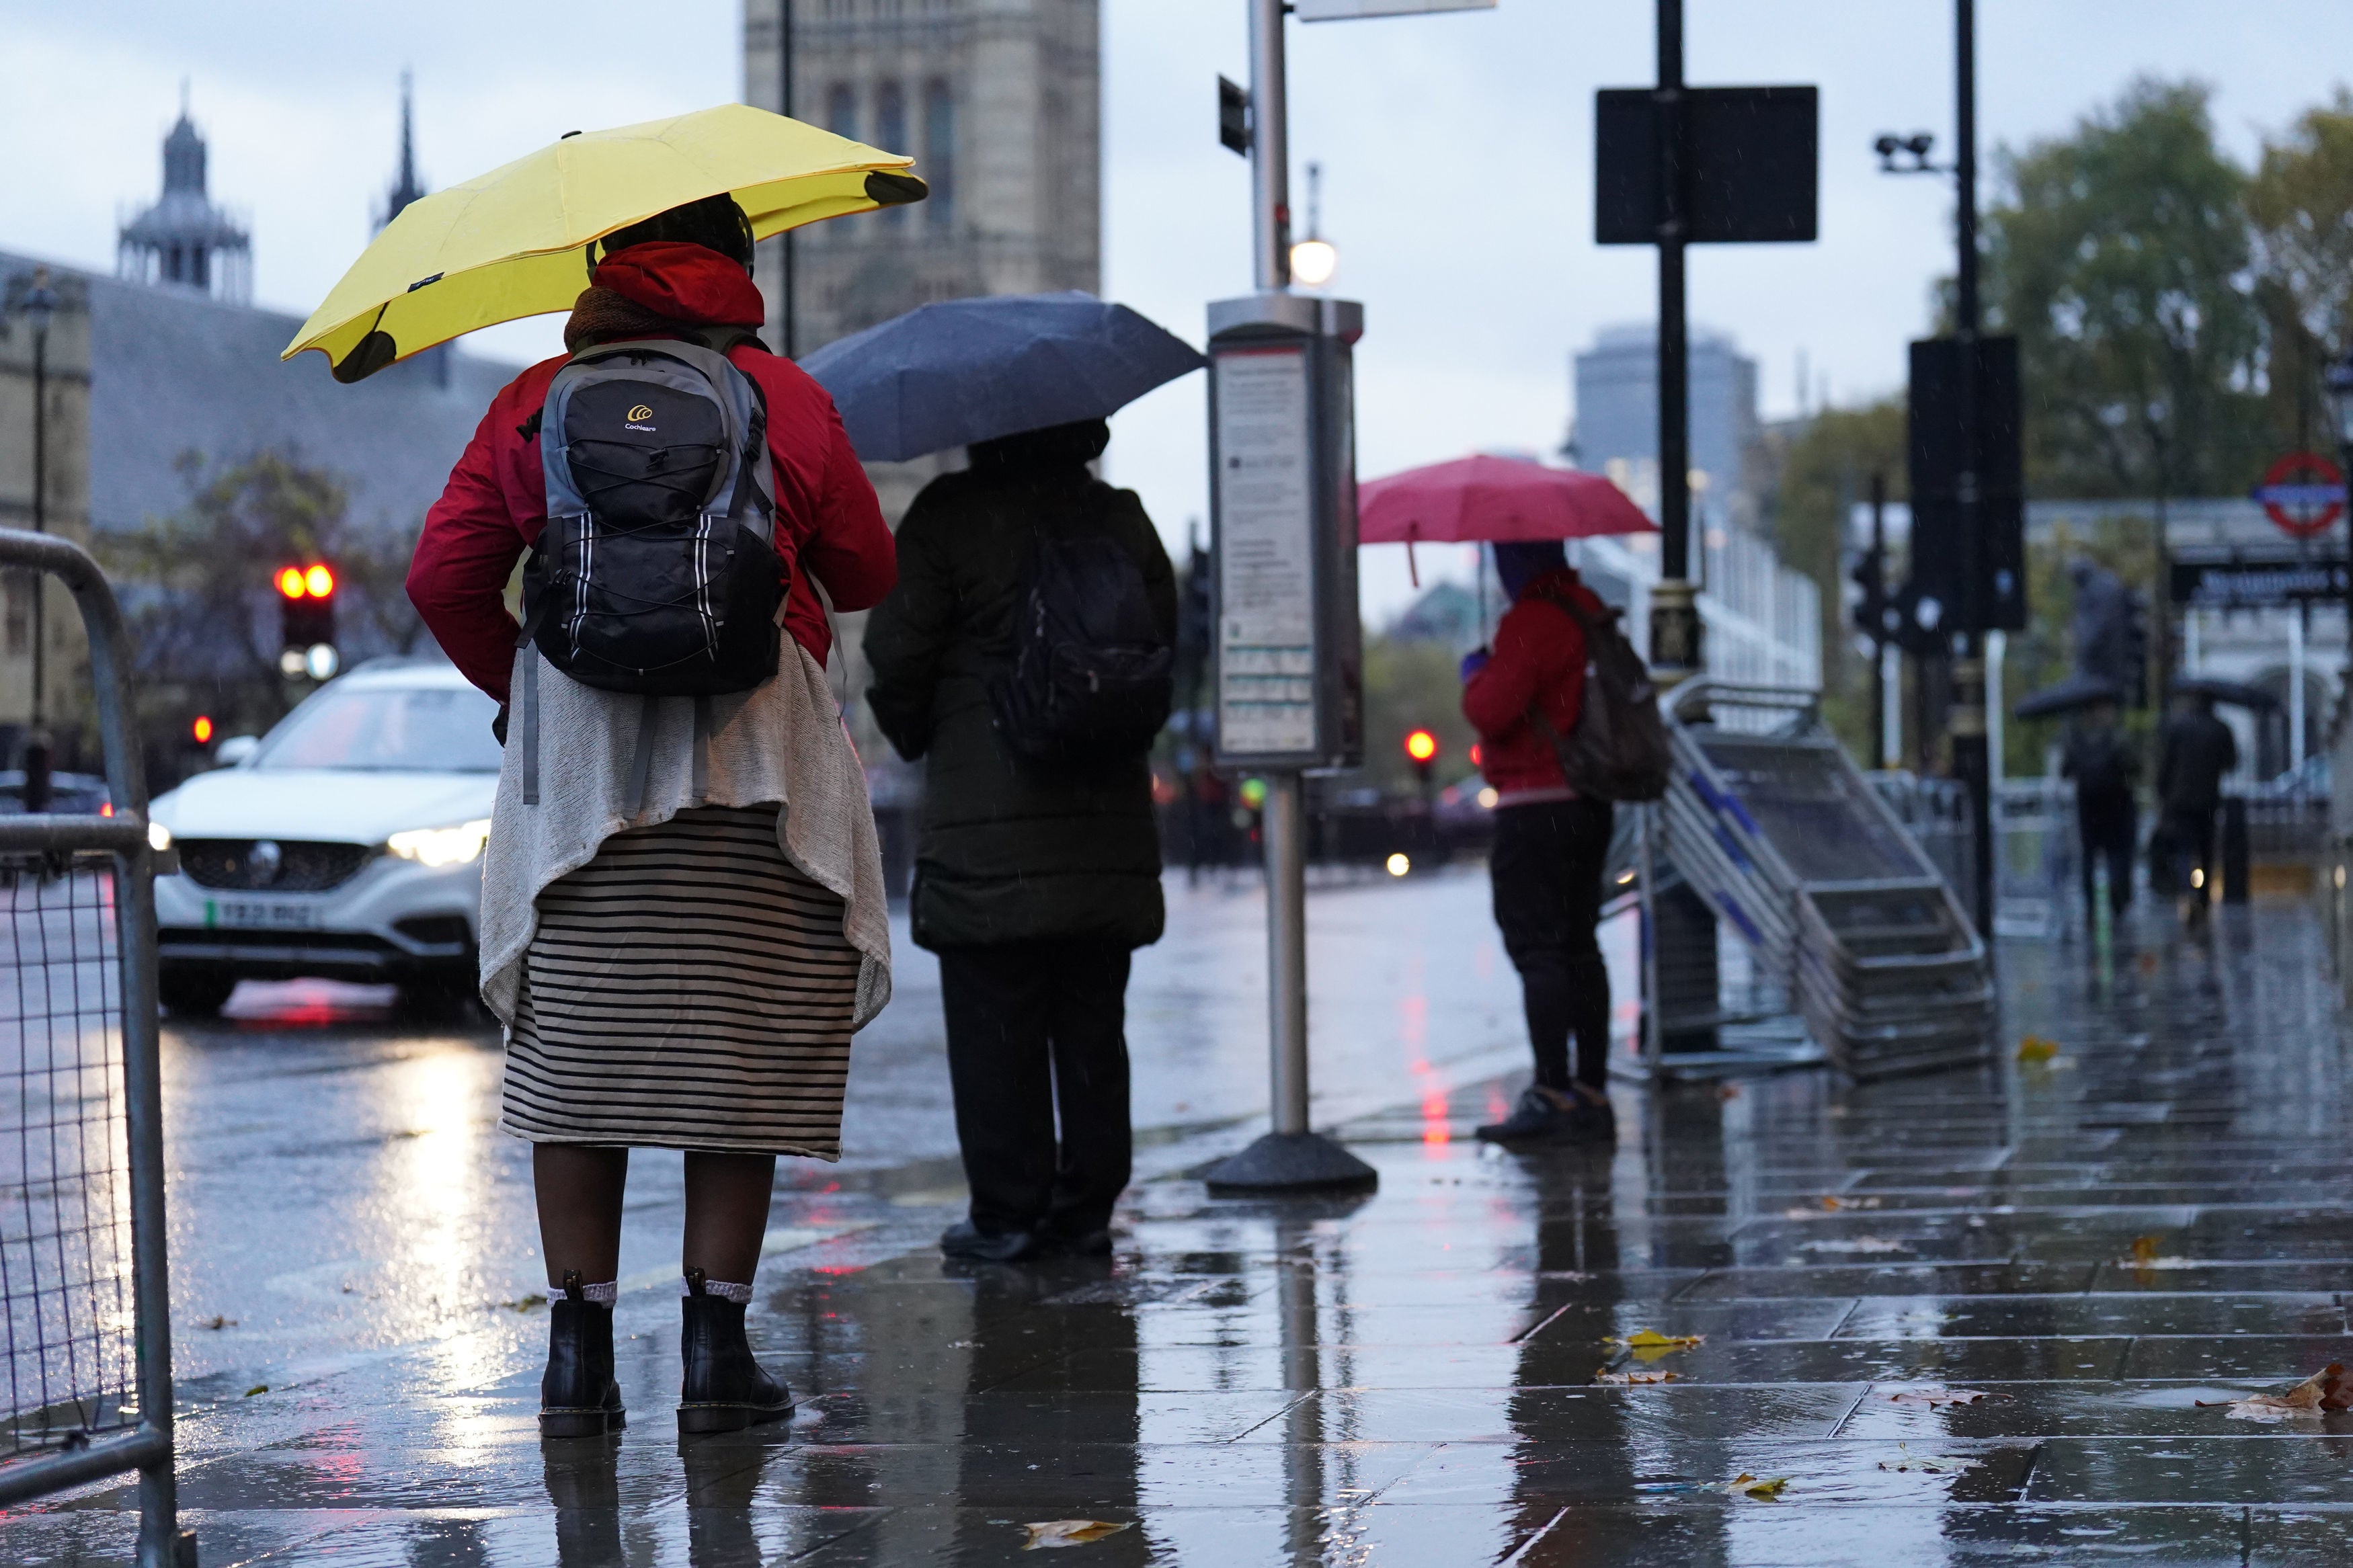 People hold umbrellas as they wait in the rain at a bus stop in Whitehall, London